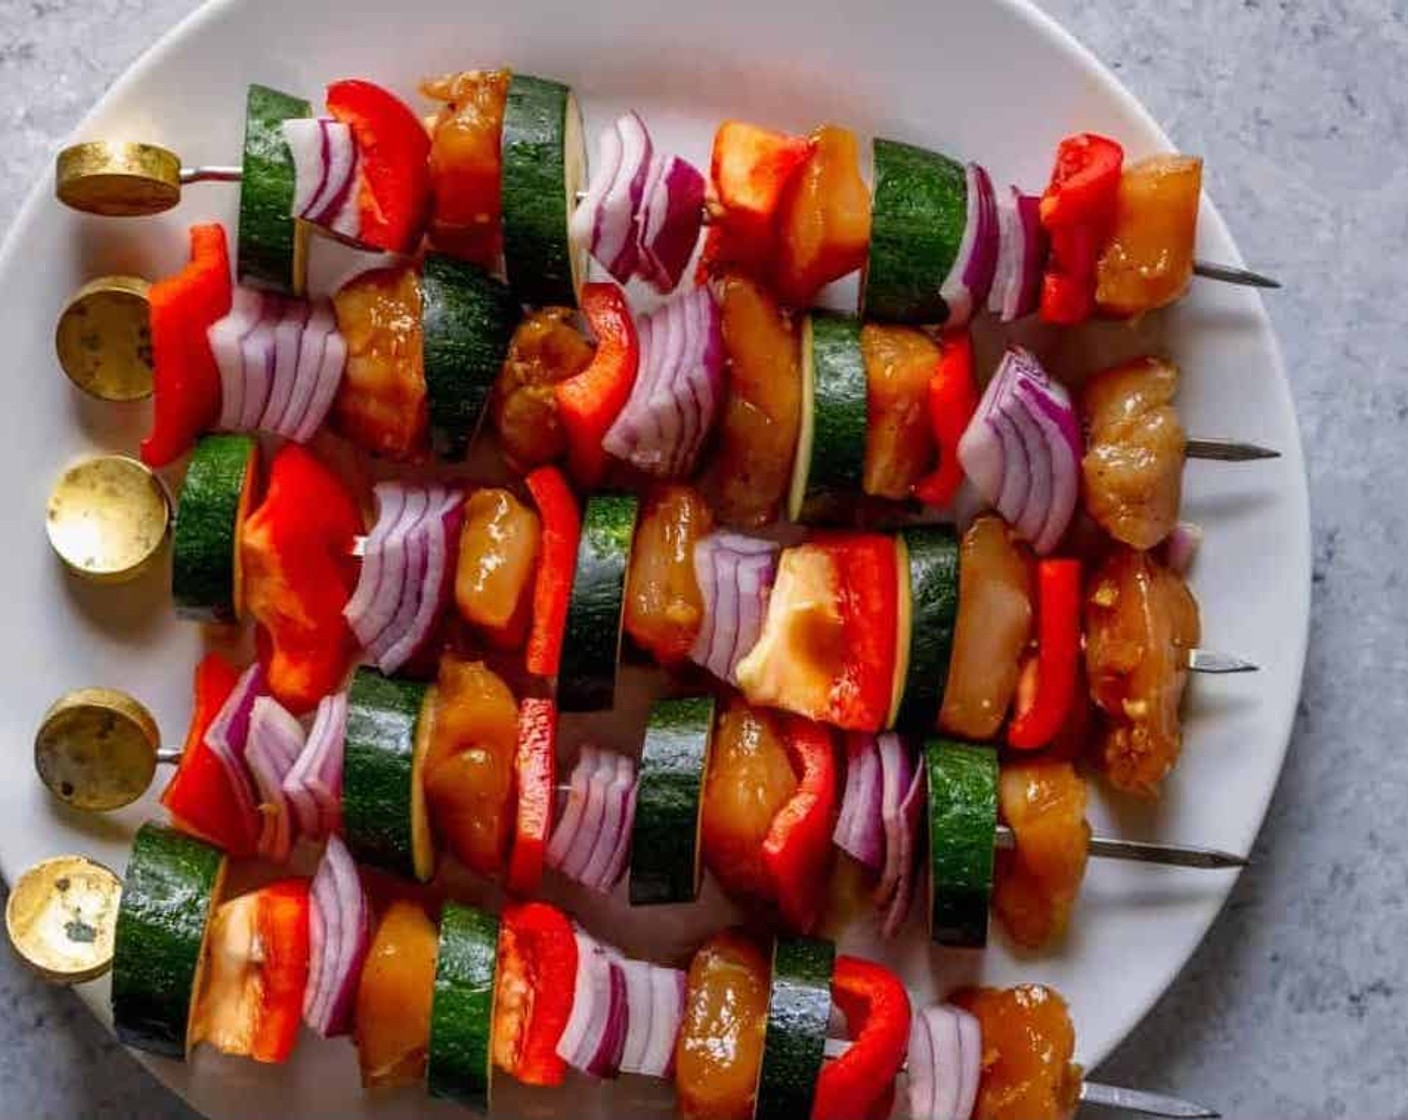 step 4 Preheat the grill to medium heat. Thread the chicken, Red Bell Pepper (1), Red Onion (1), and  Zucchini (1) onto the skewers. Place skewers onto the grill and cook for 5-7 minutes per side, until cooked through.